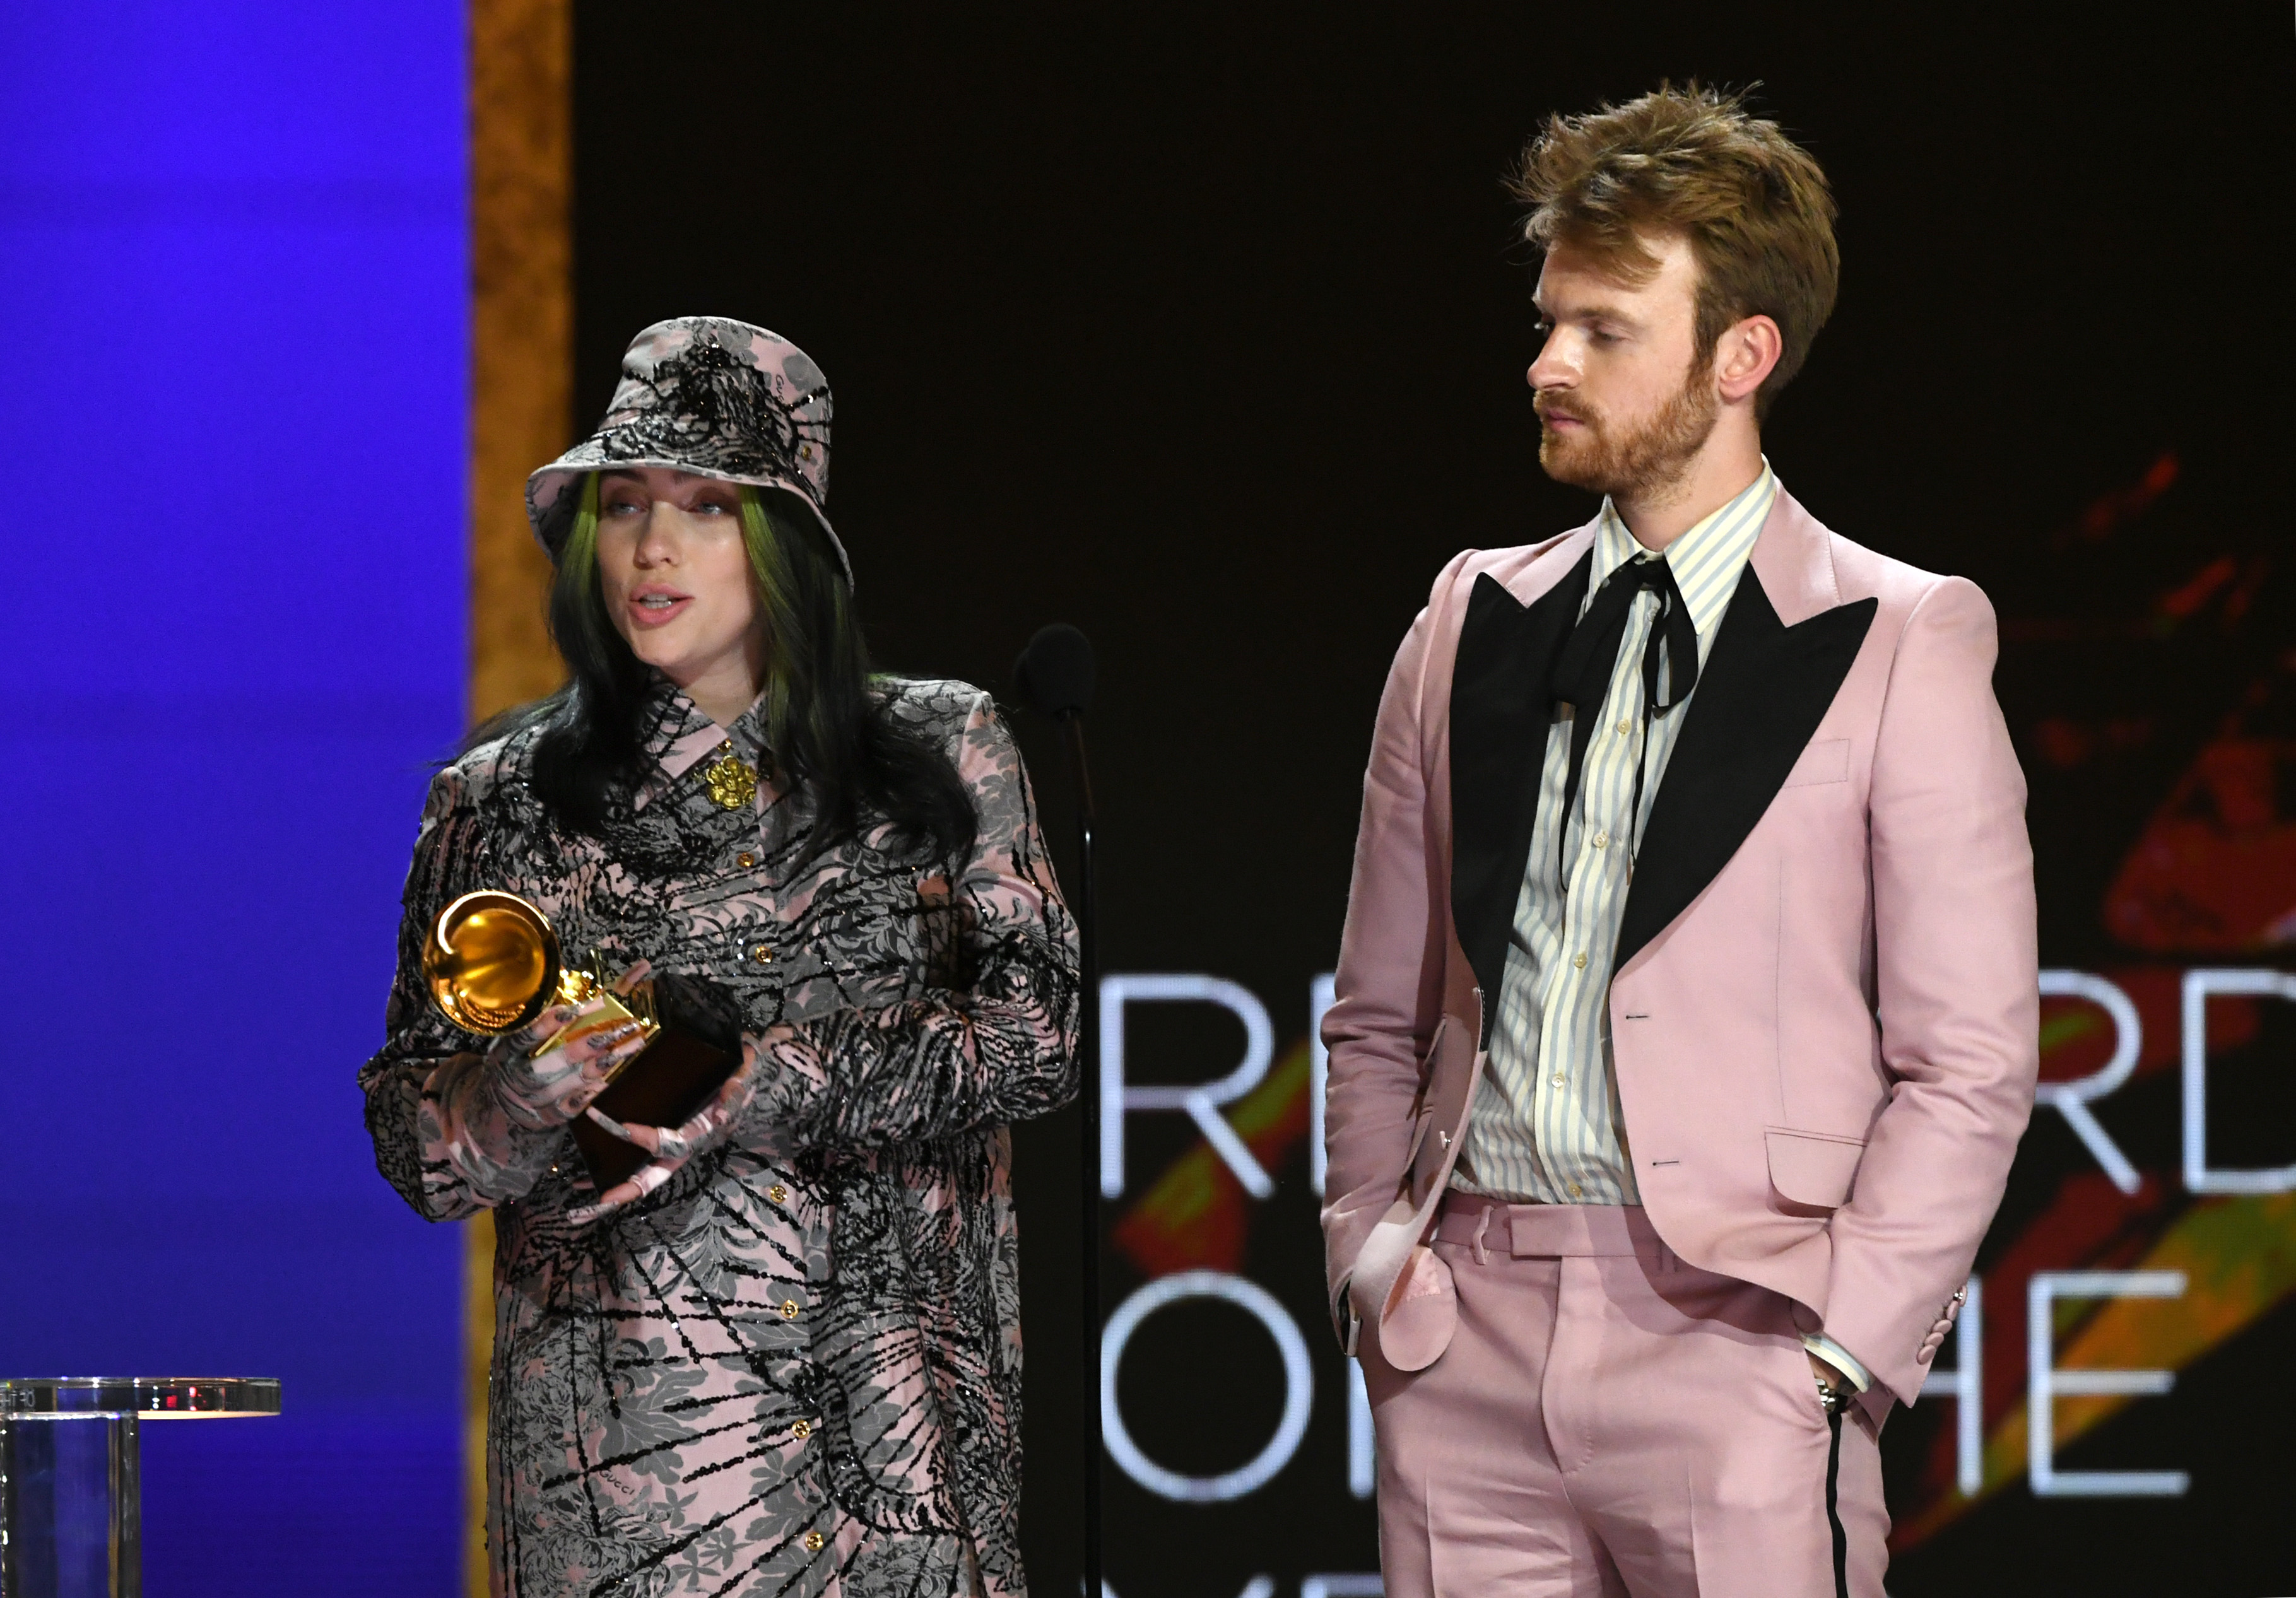 Billie Eilish and Finneas attend the Grammy's for No Time to Die